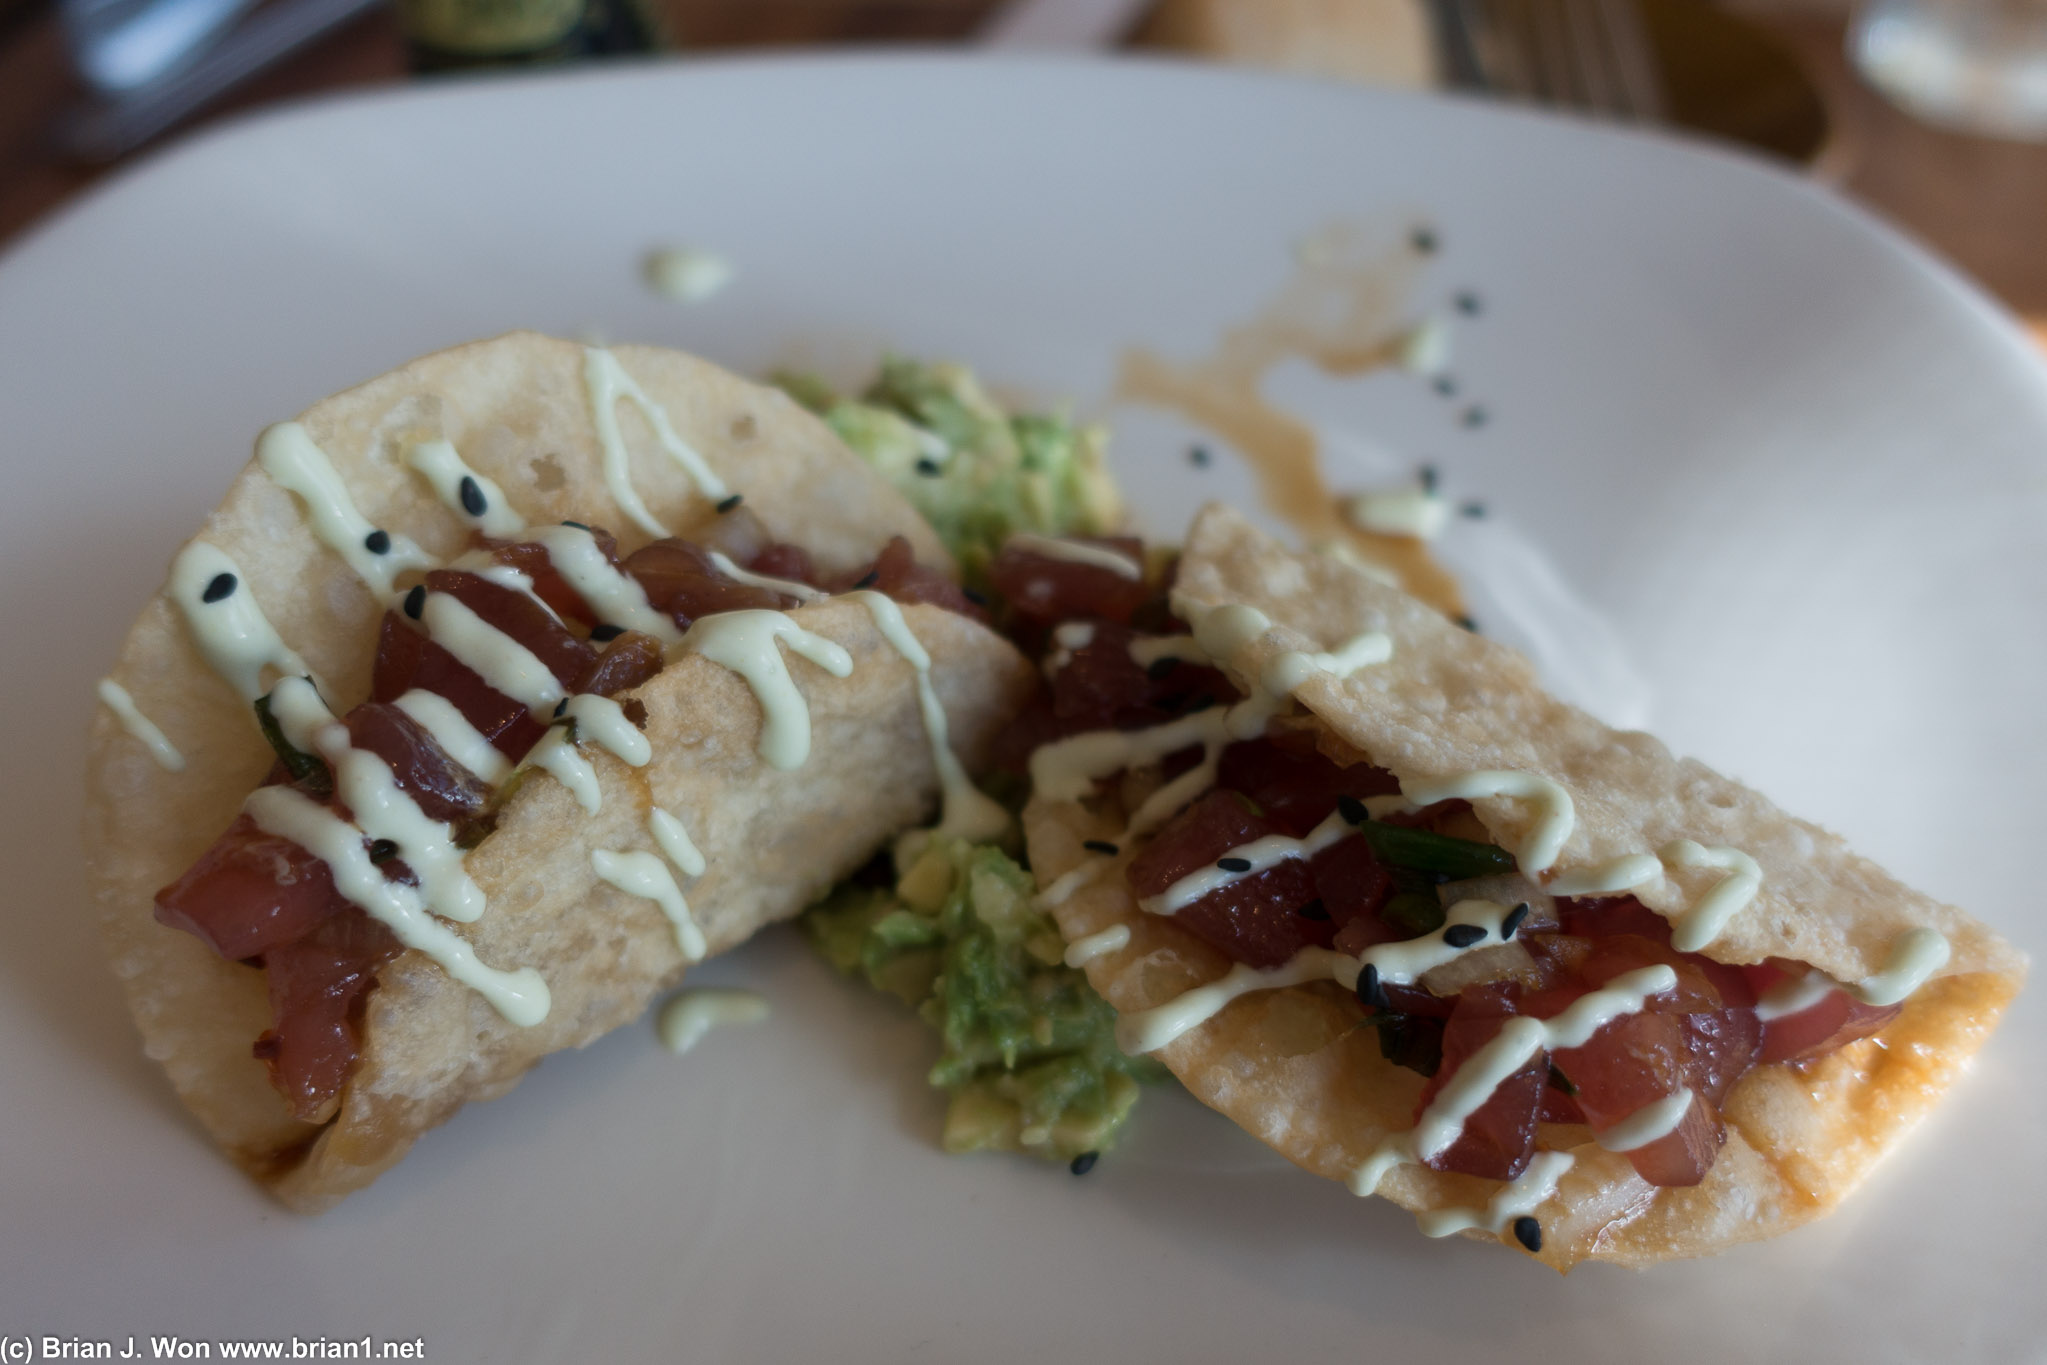 Ahi tuna tacos. Kinda what a white person would think tacos are.